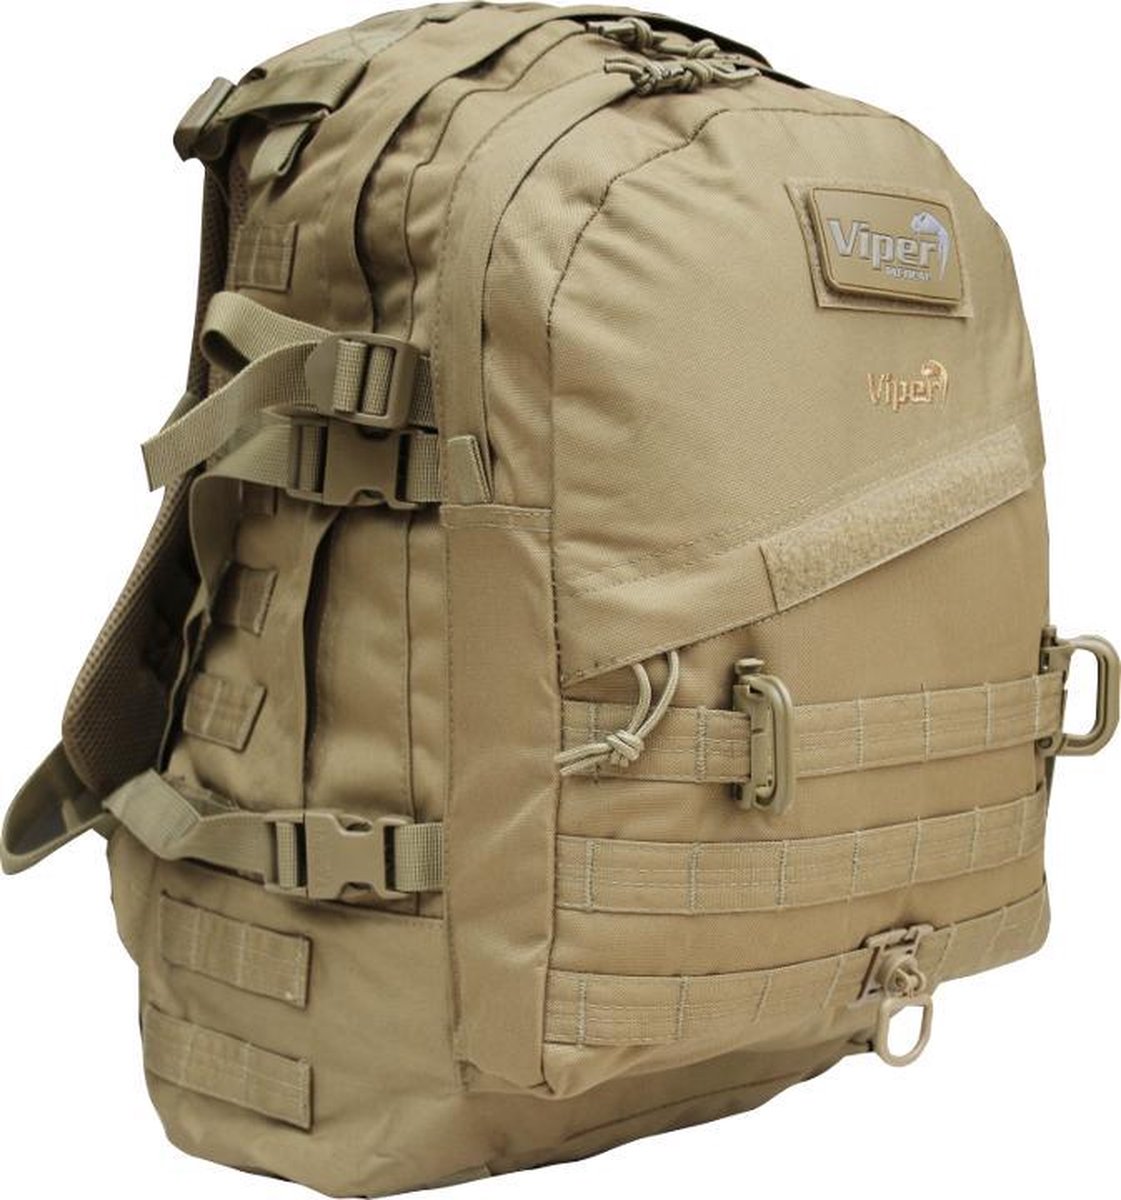 viper special ops pack coyote Bxhxd 35x46x23 | bol.com